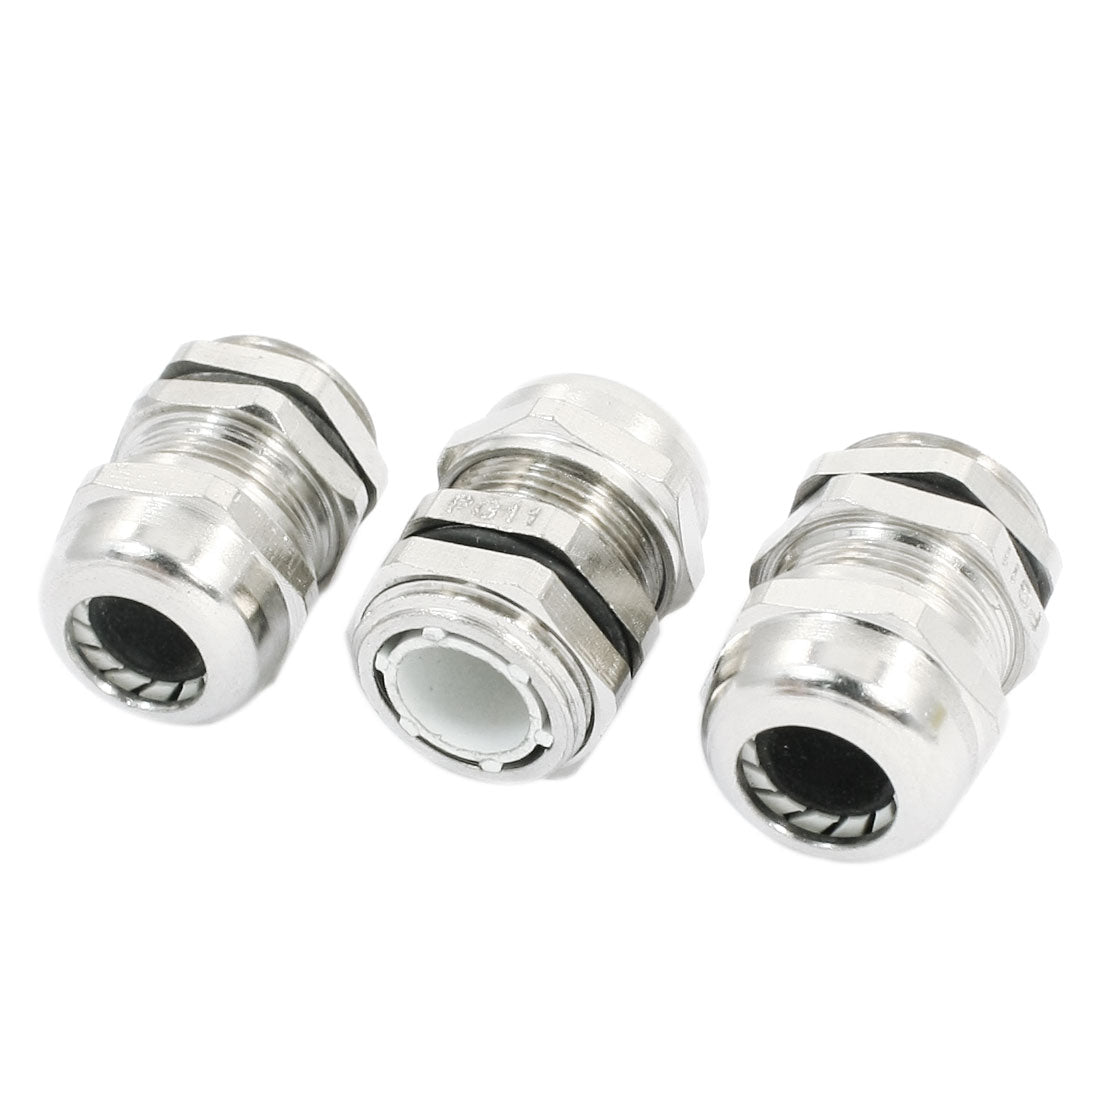 uxcell Uxcell 3 PCS PG11 5-10mm Wire Silver Tone Metal Waterproof Connector Locknut Stuffing Cable Gland